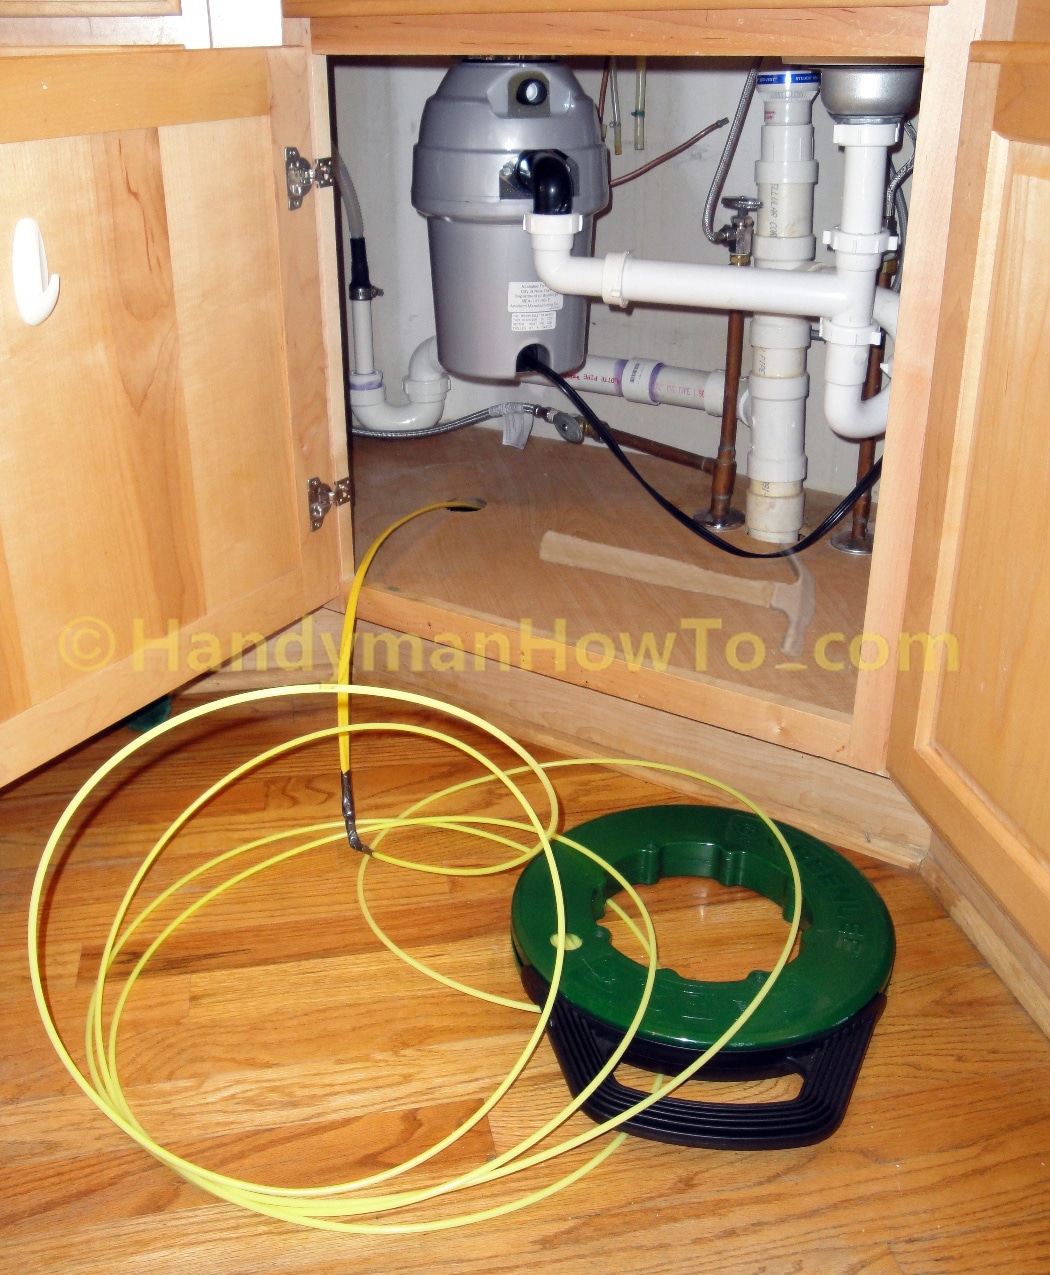 How To Wire An Electrical Outlet Under The Kitchen Sink Fishing Cable